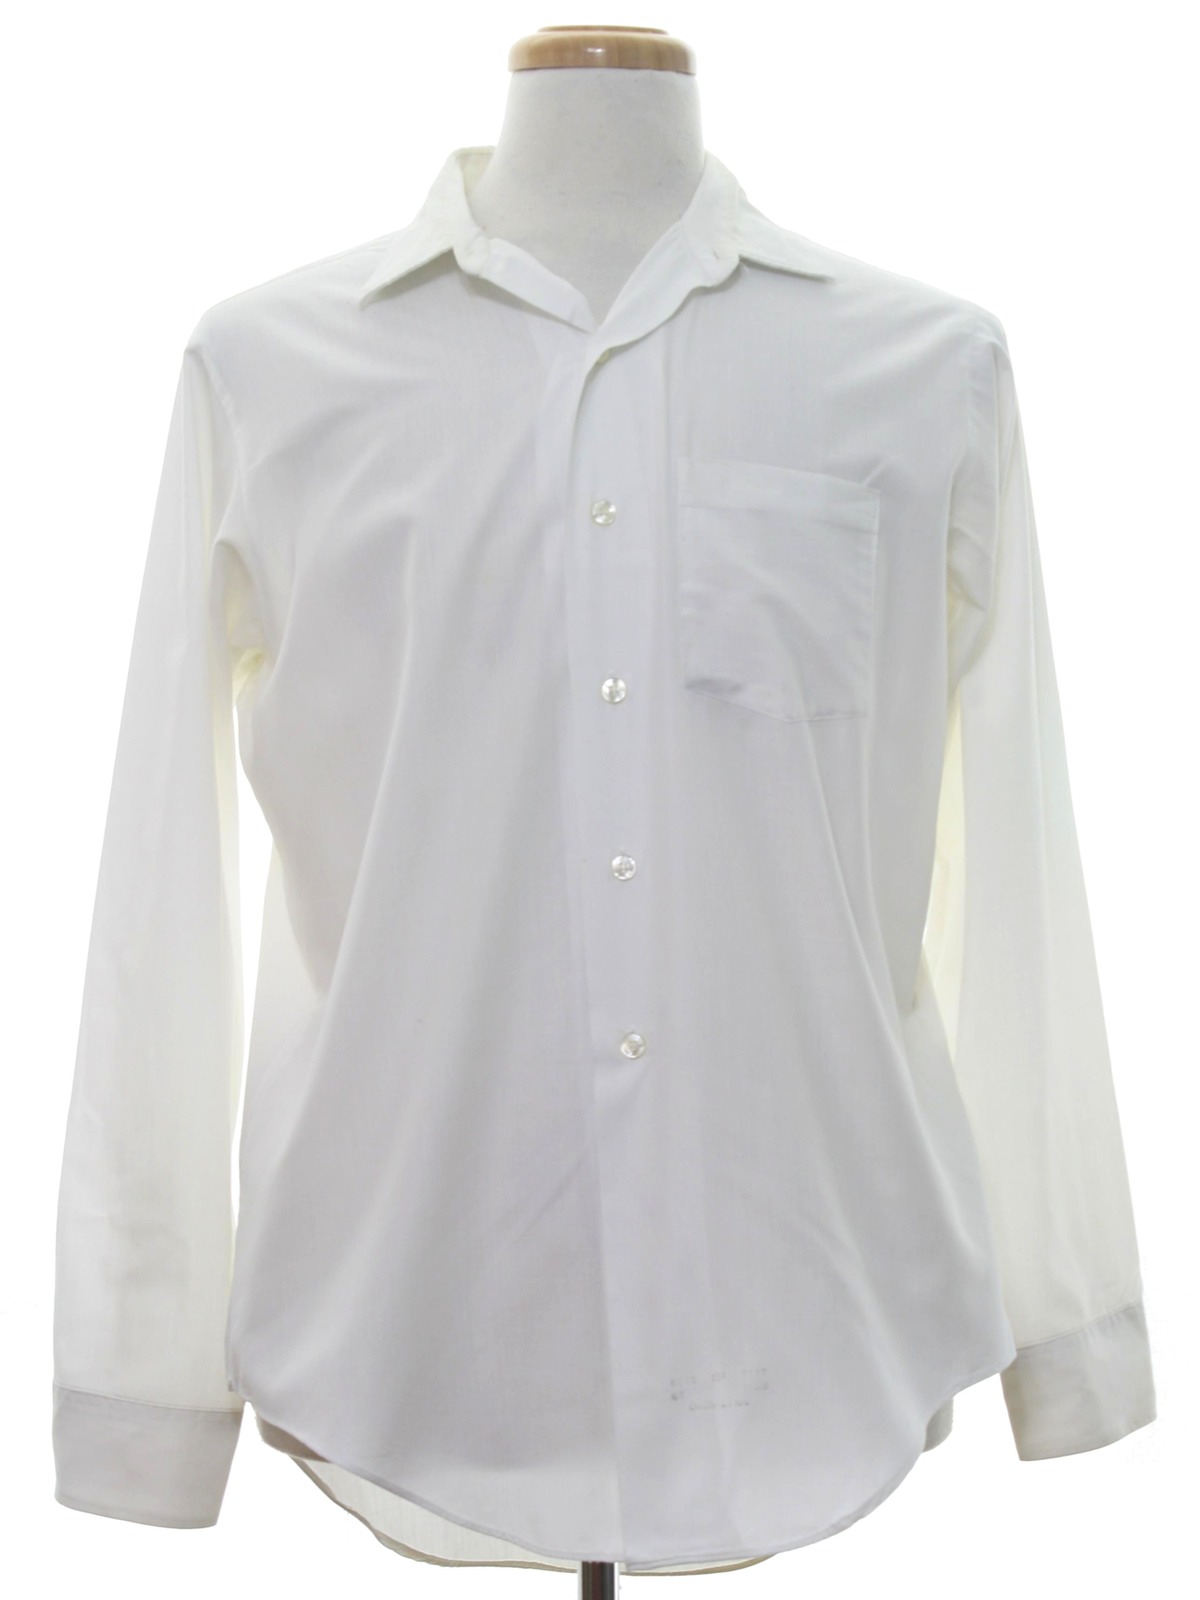 1960's Retro Shirt: Early 60s -Towncraft Penn Prest Tapered- Mens white ...